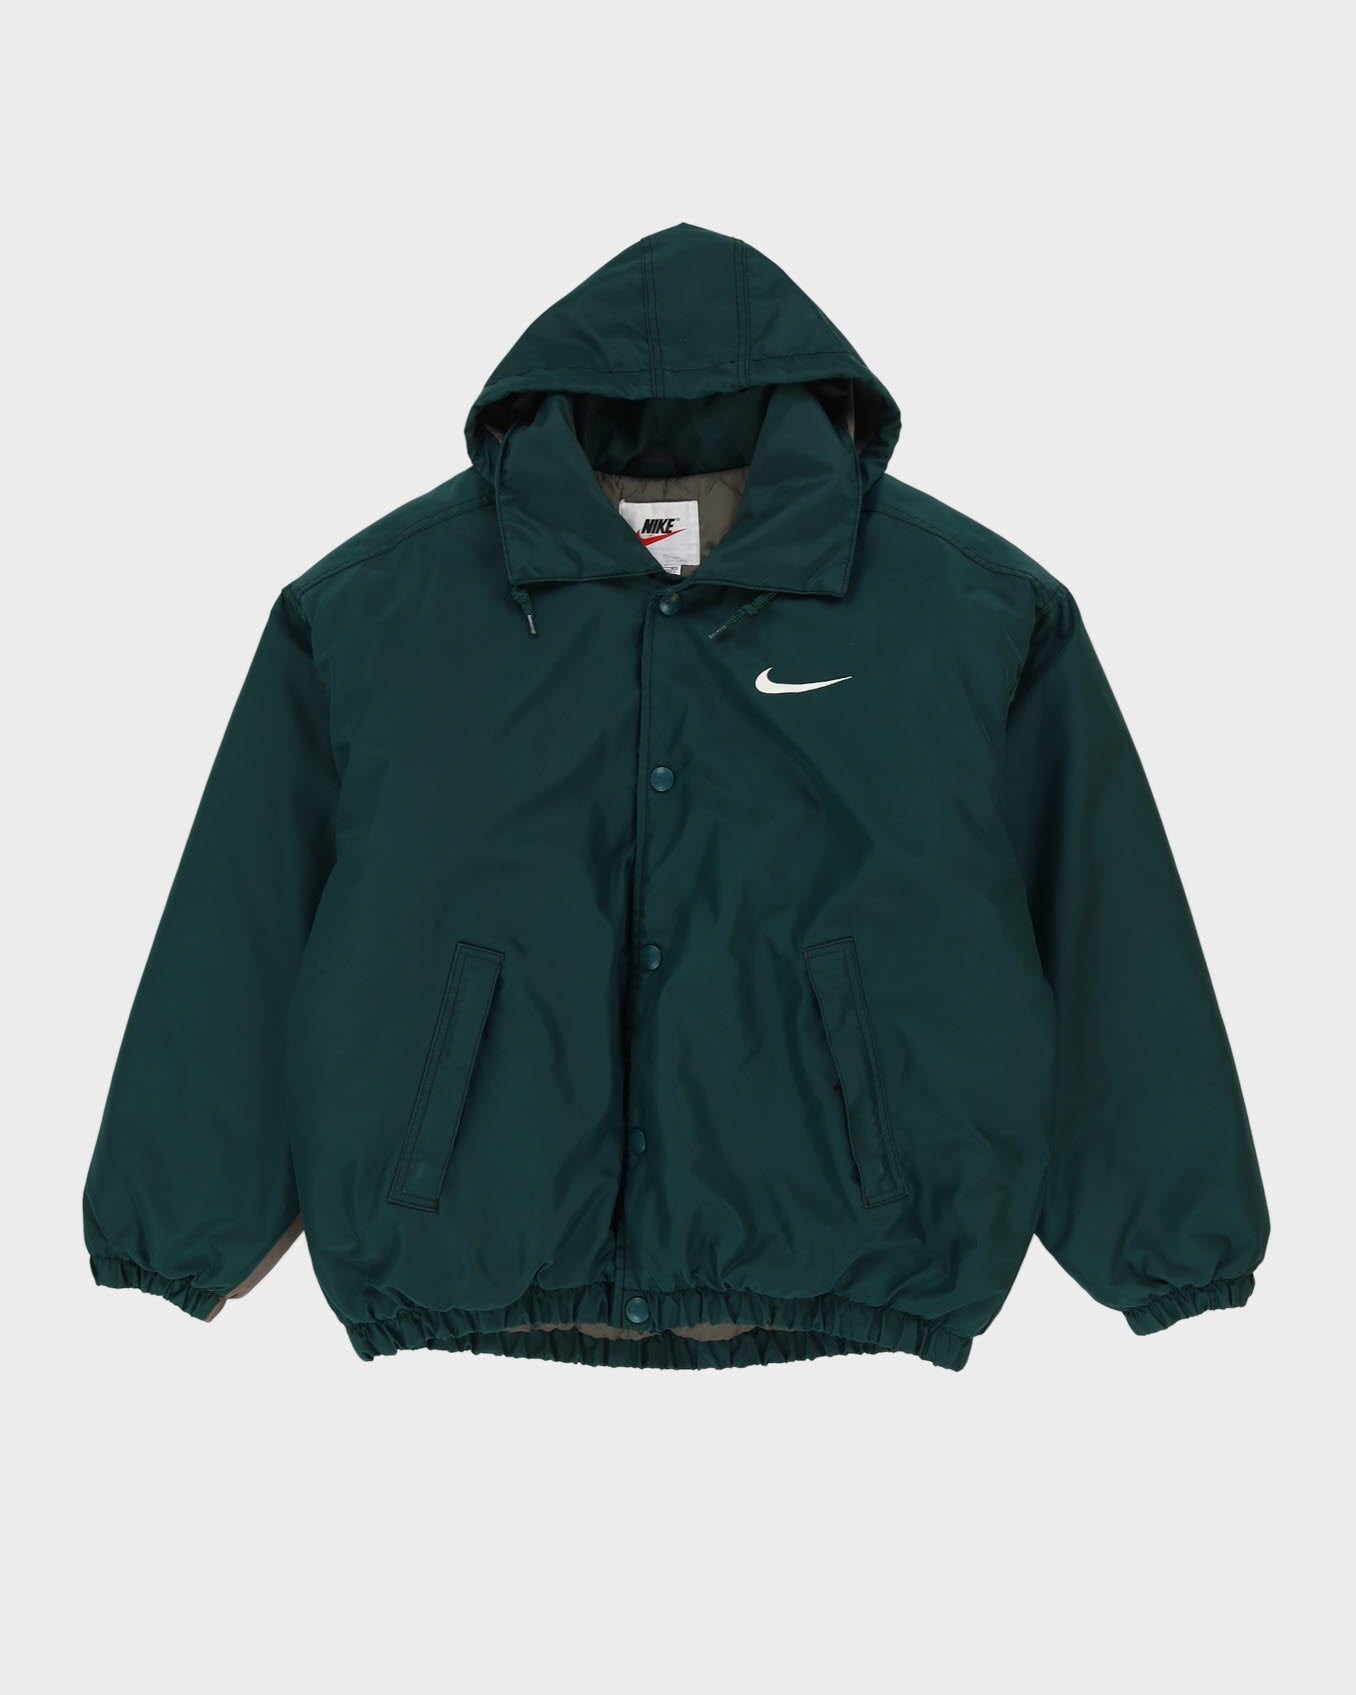 Vintage 90s Nike Green Puffer Jacket With Embroidery - M